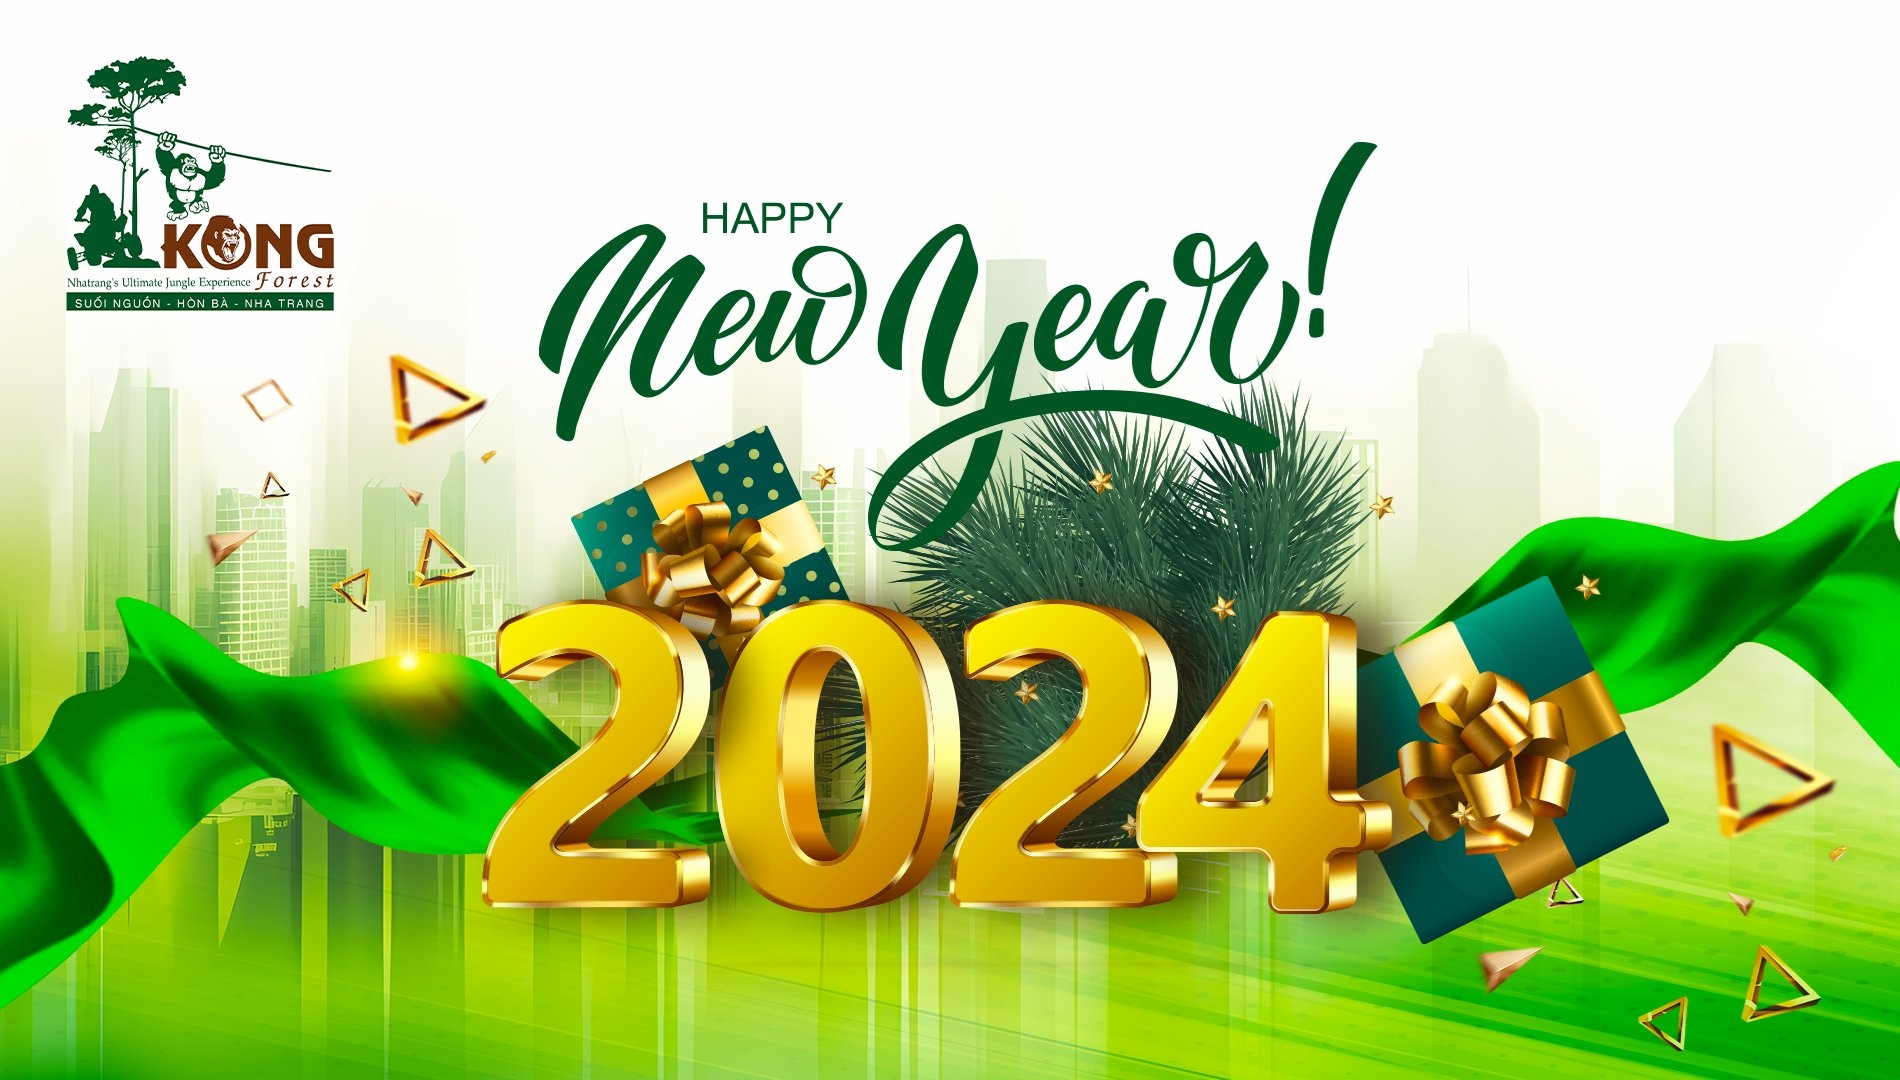 KONG FOREST | HAPPY NEW YEAR 2024